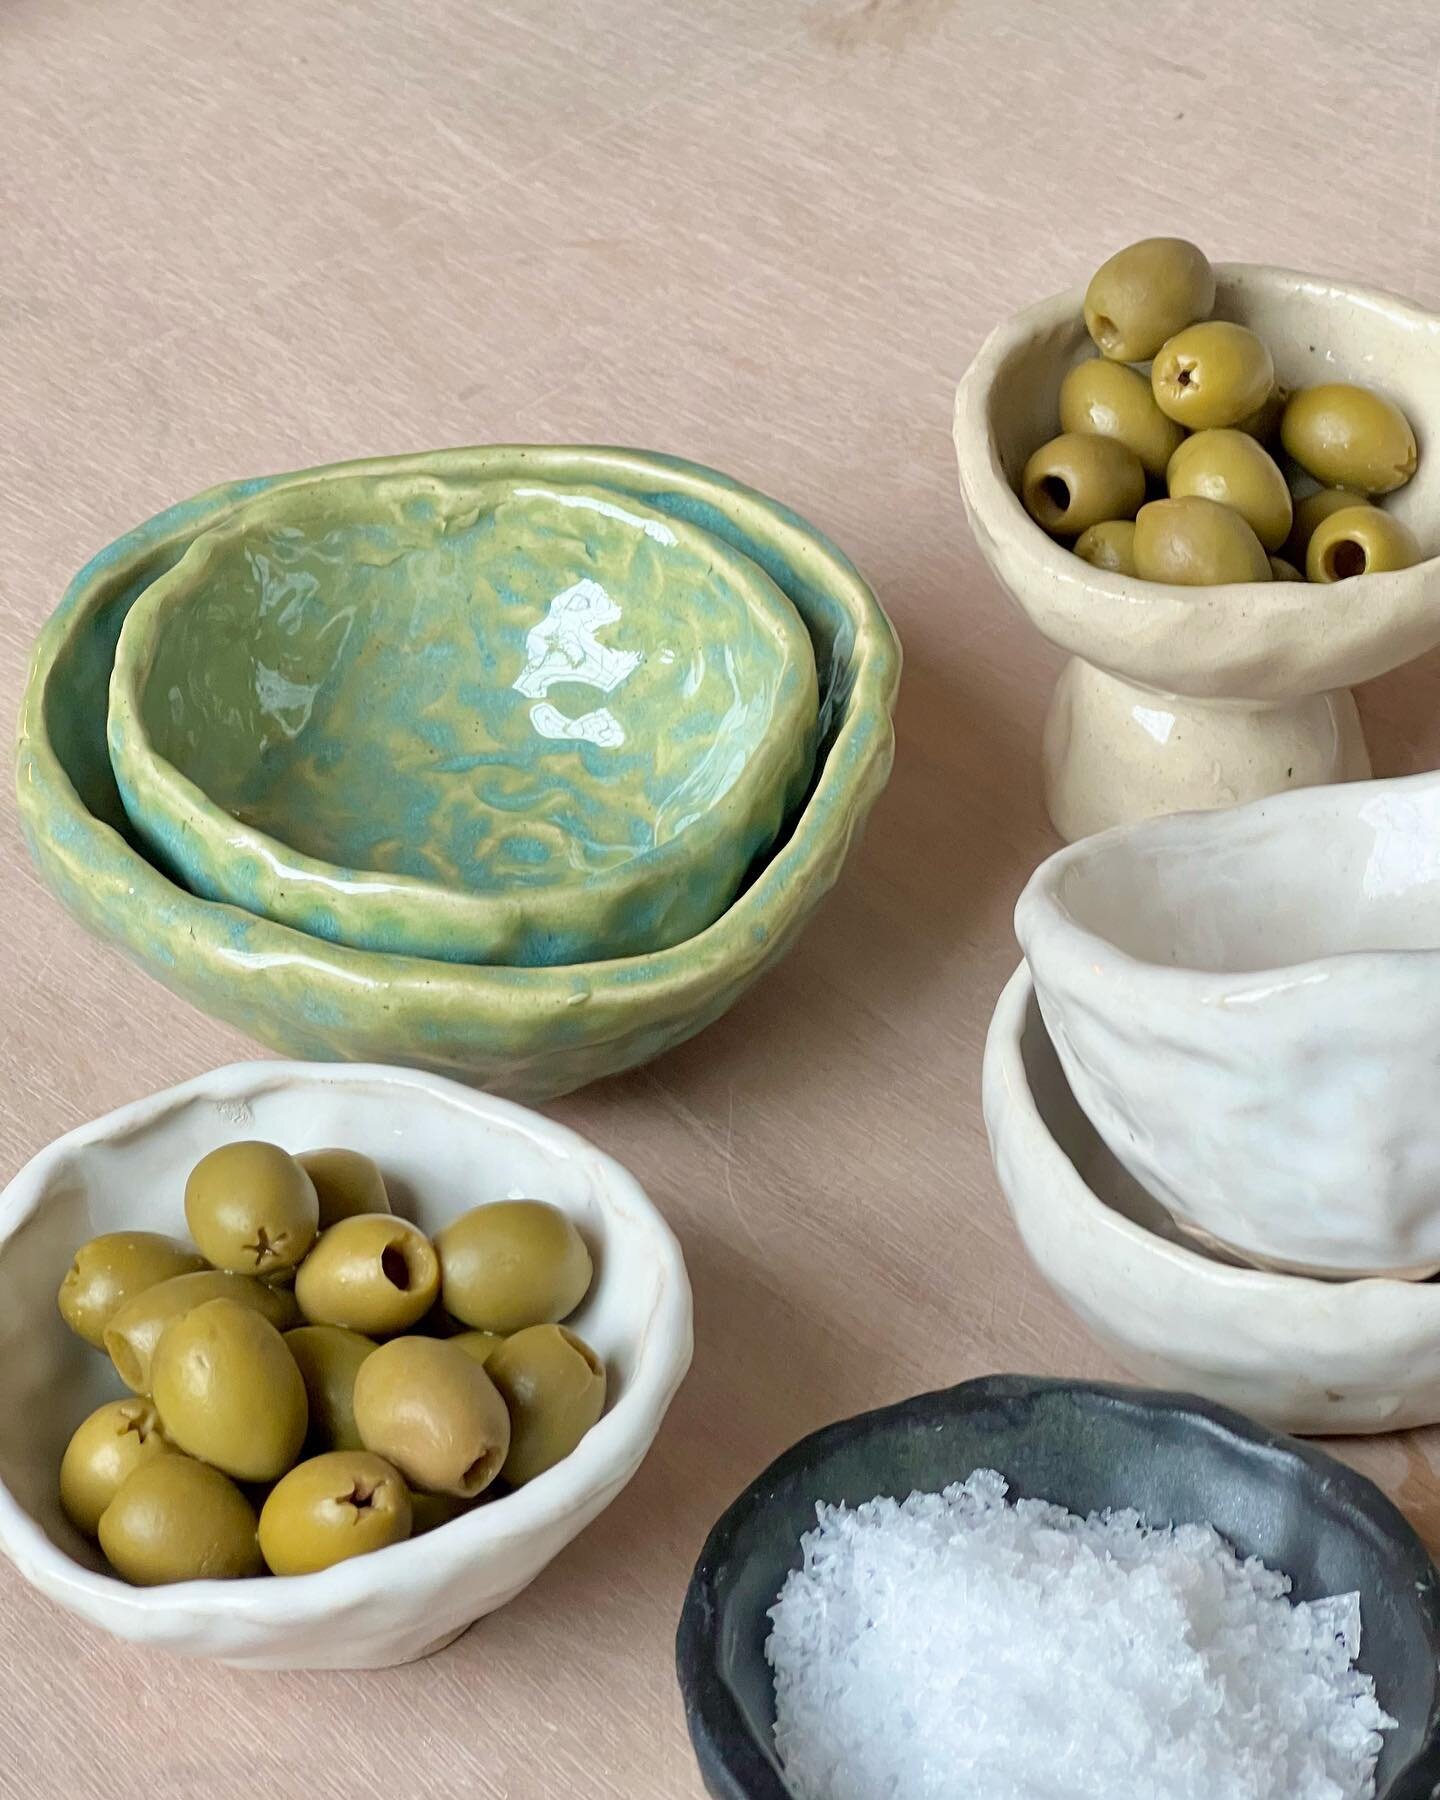 Looking for a great way tapas the time this Sunday? Join ceramicist @kerryplz in an late afternoon of making Tapas Dishes through the art of pinching - a  s l o w and relaxing process of forming beautiful small bowls using only your hands! Fancy maki